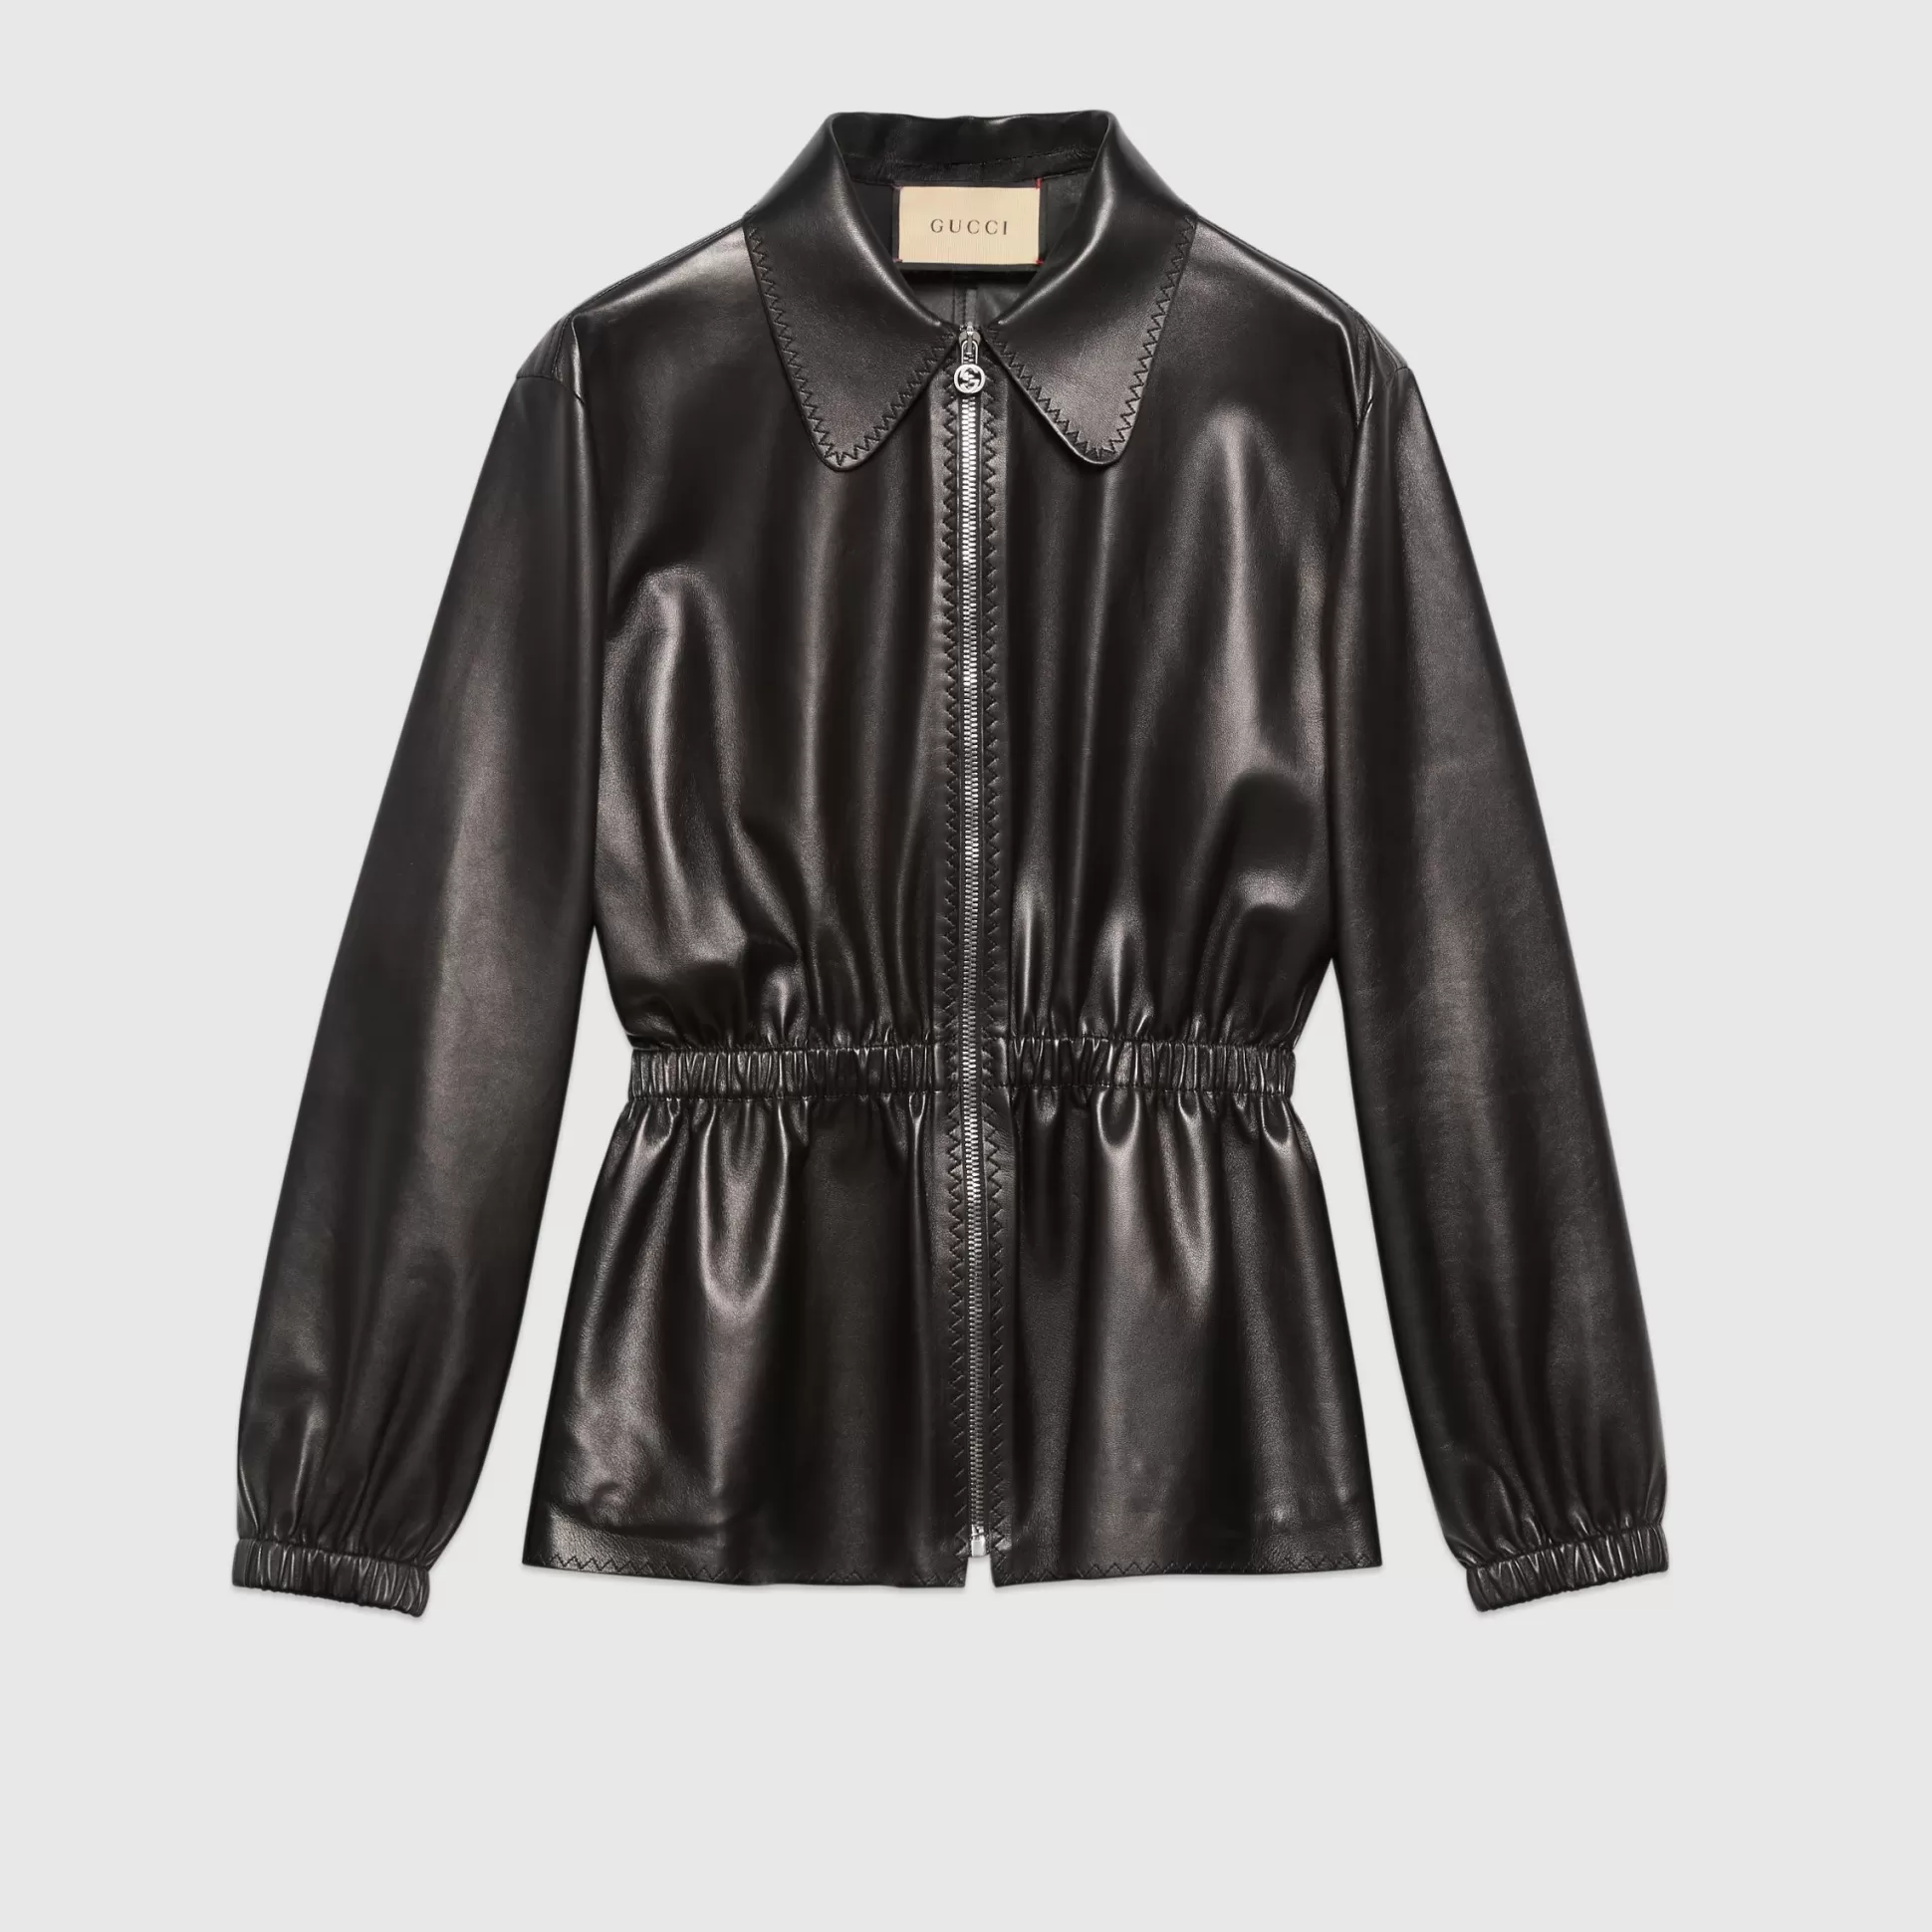 GUCCI Leather Zip Jacket-Women Leather